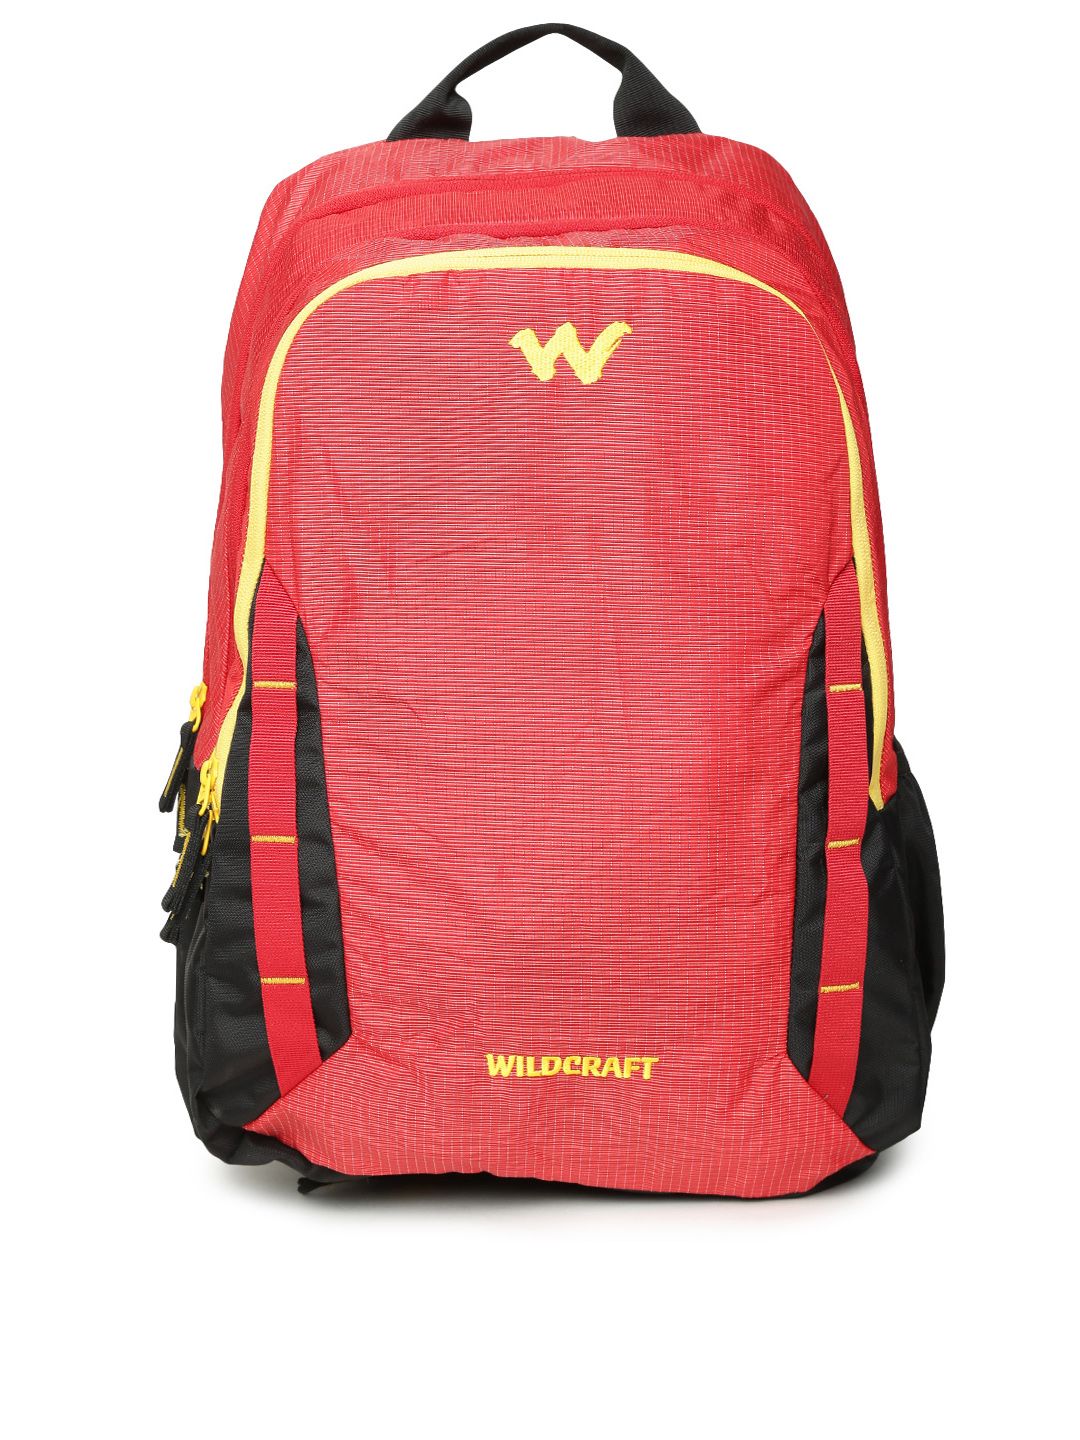 Wildcraft Unisex Red 7 Latlong 6 Patterned Backpack Price in India